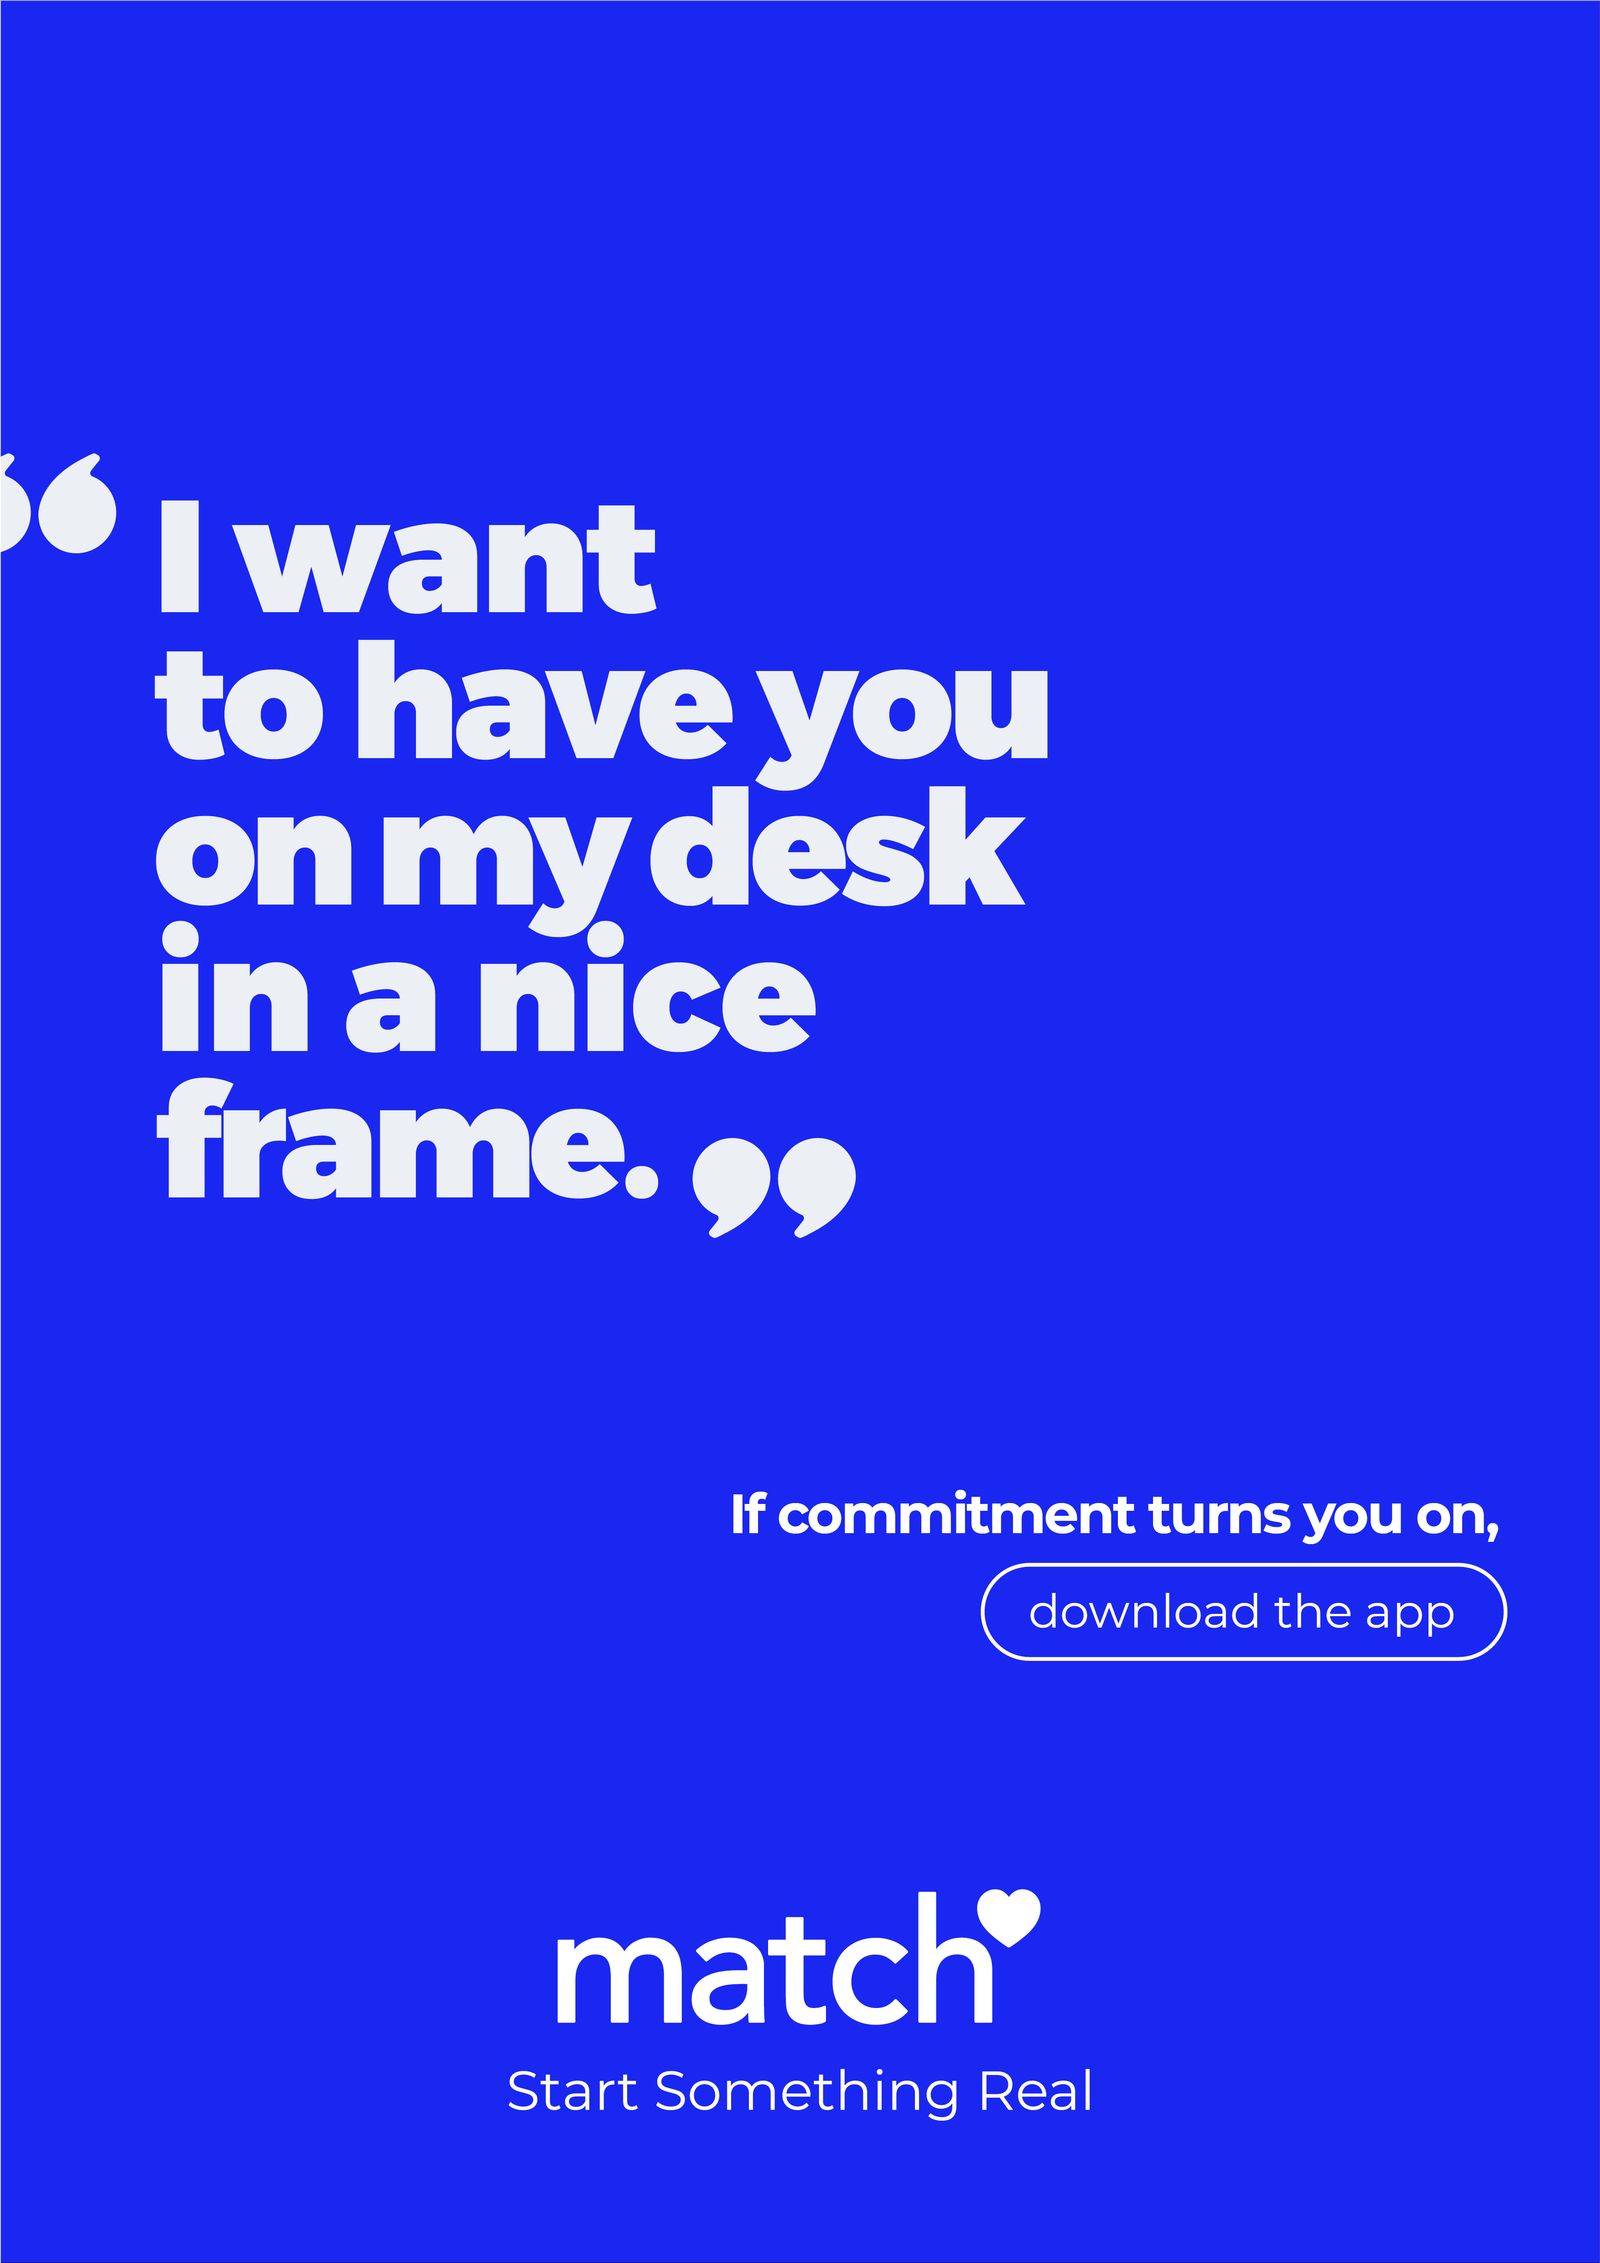 Meetic "If commitment turns you on"|adRuby.com